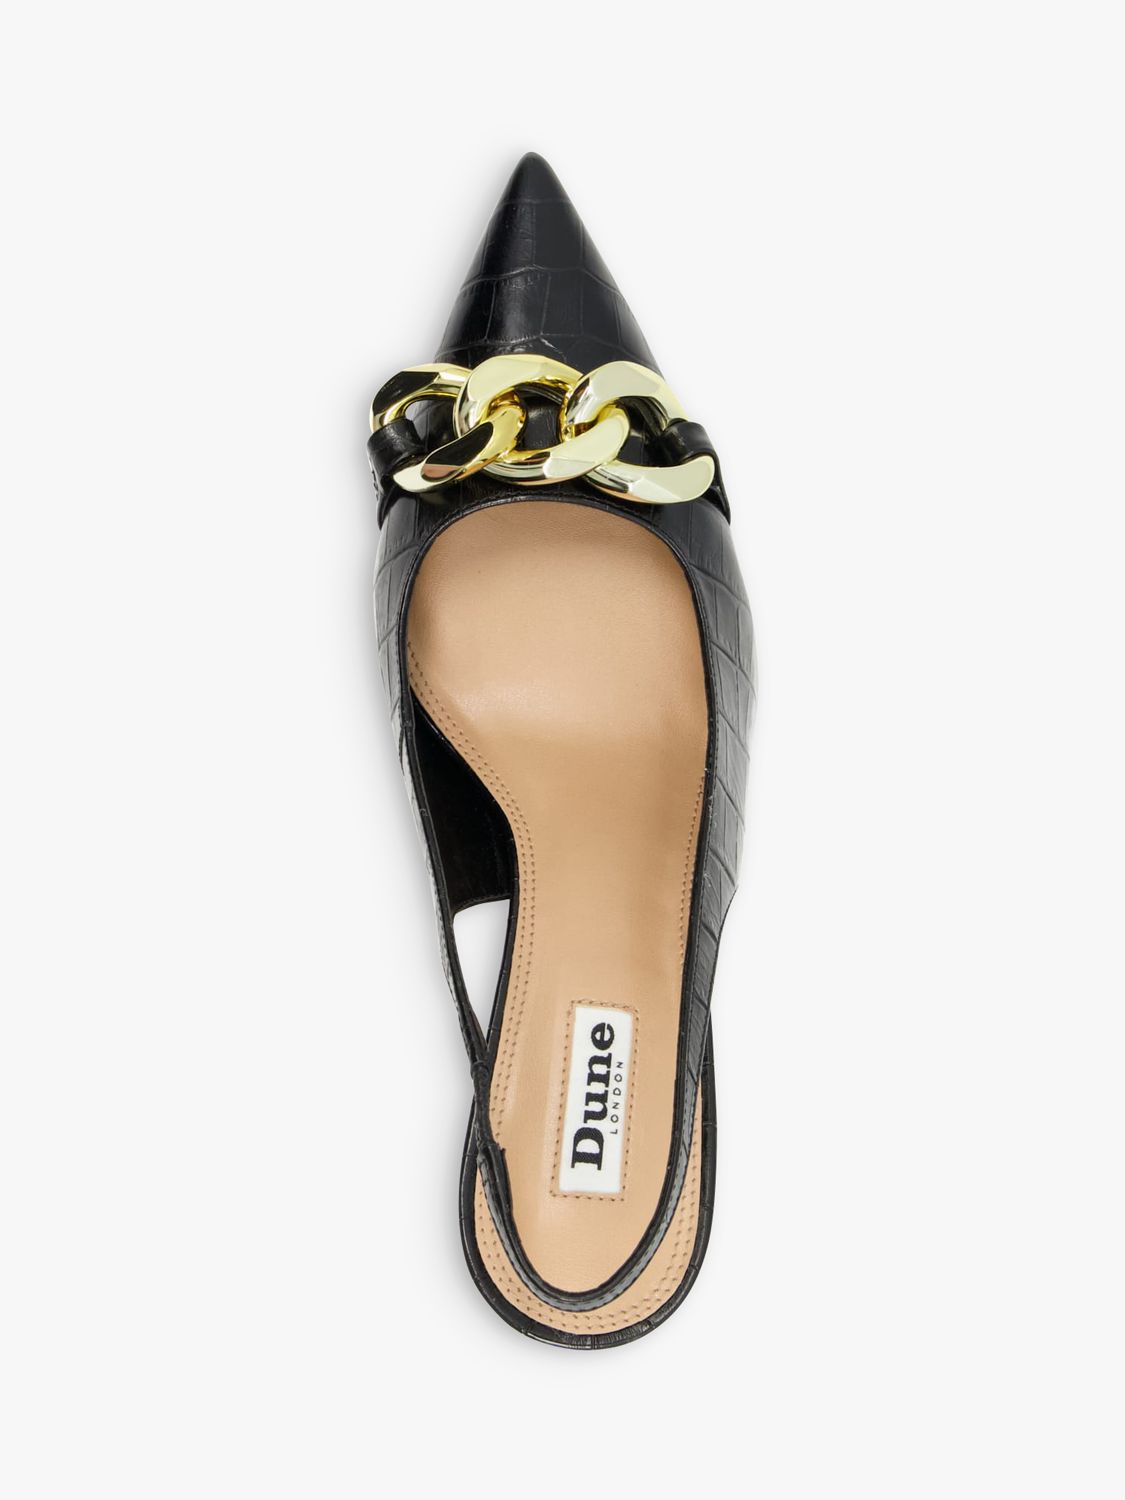 Buy Dune Canary Leather Croc Slingback Court Shoes Online at johnlewis.com